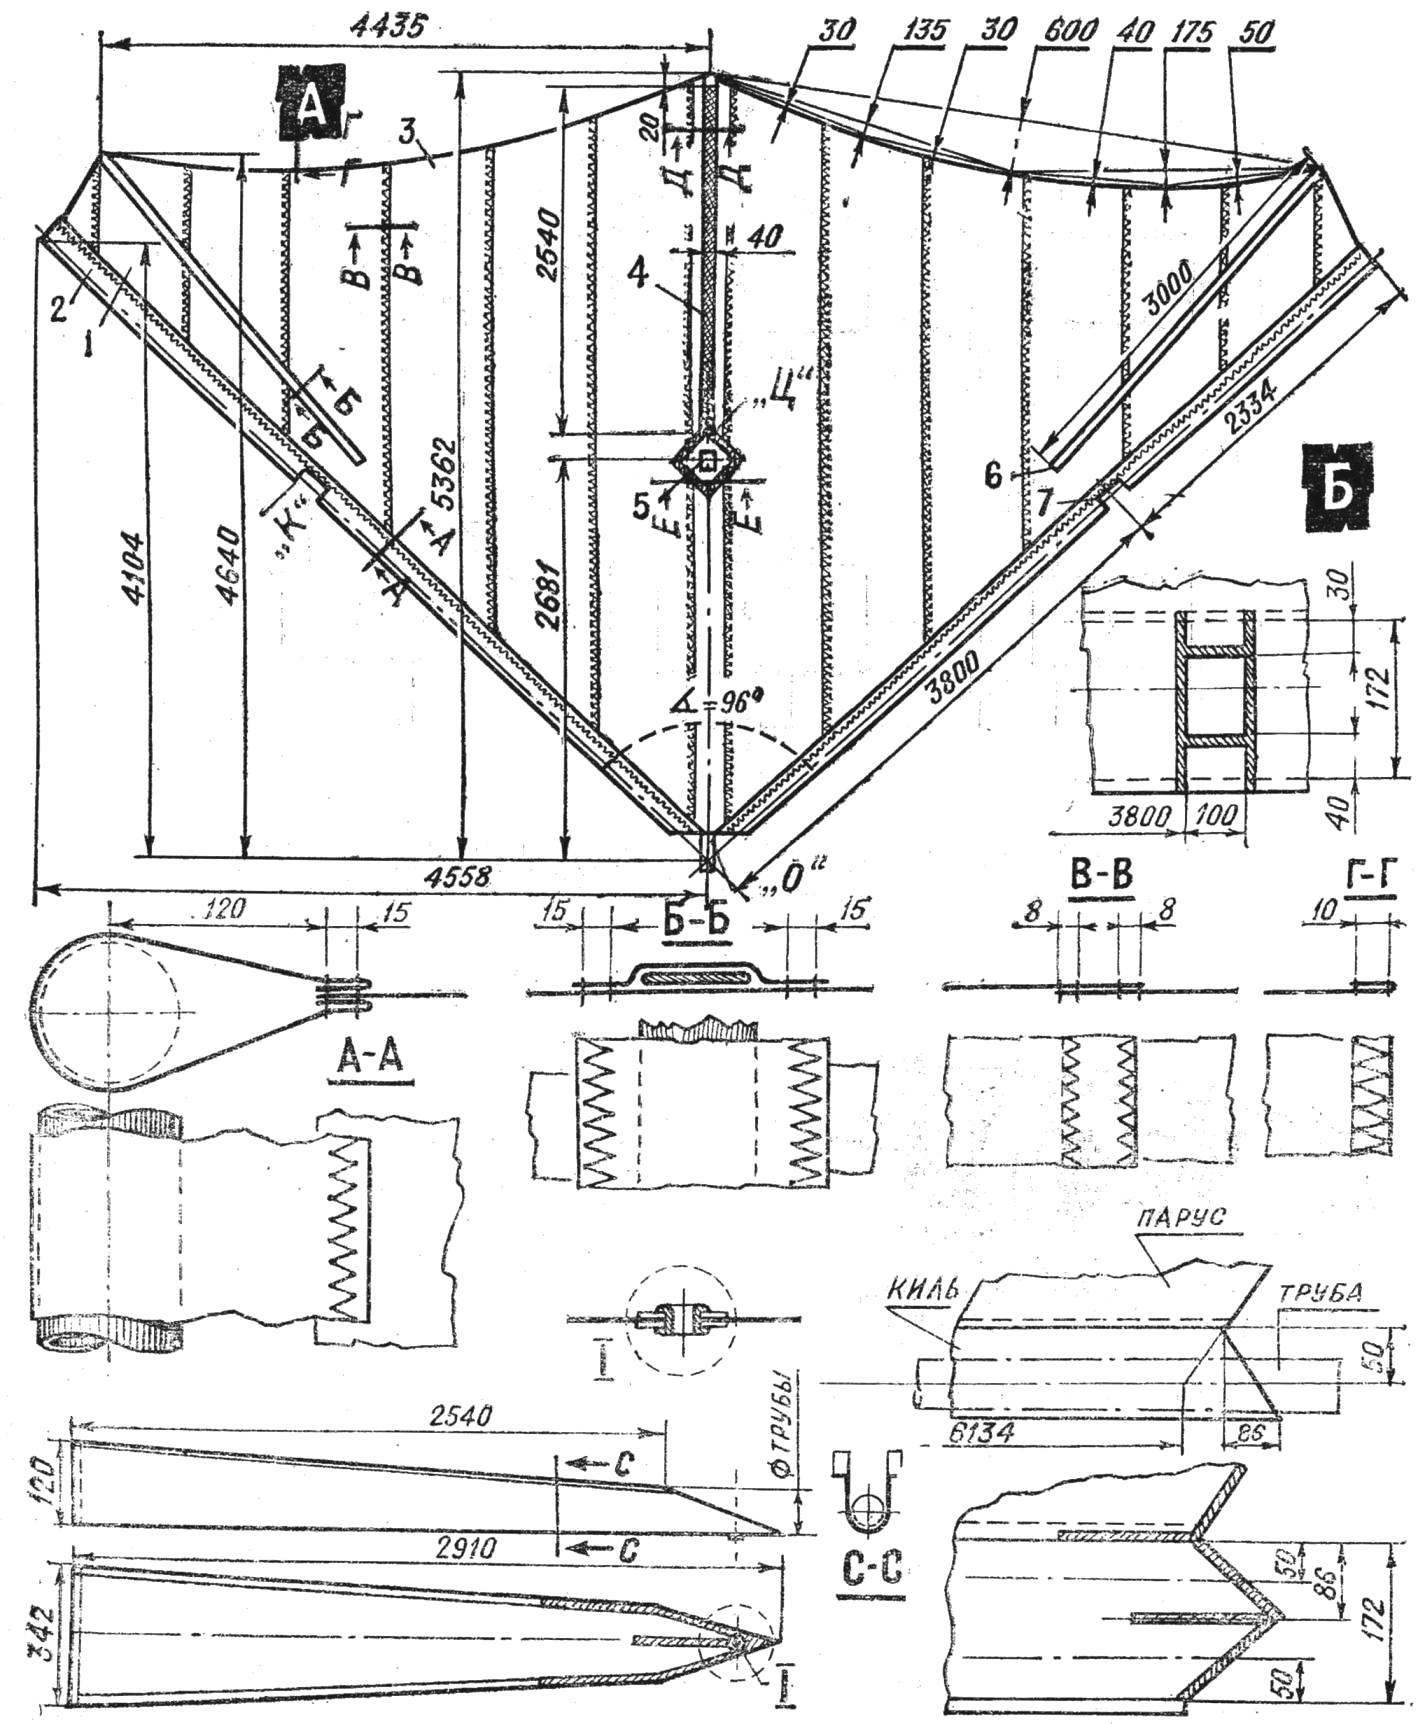  Design of a sail and its parts